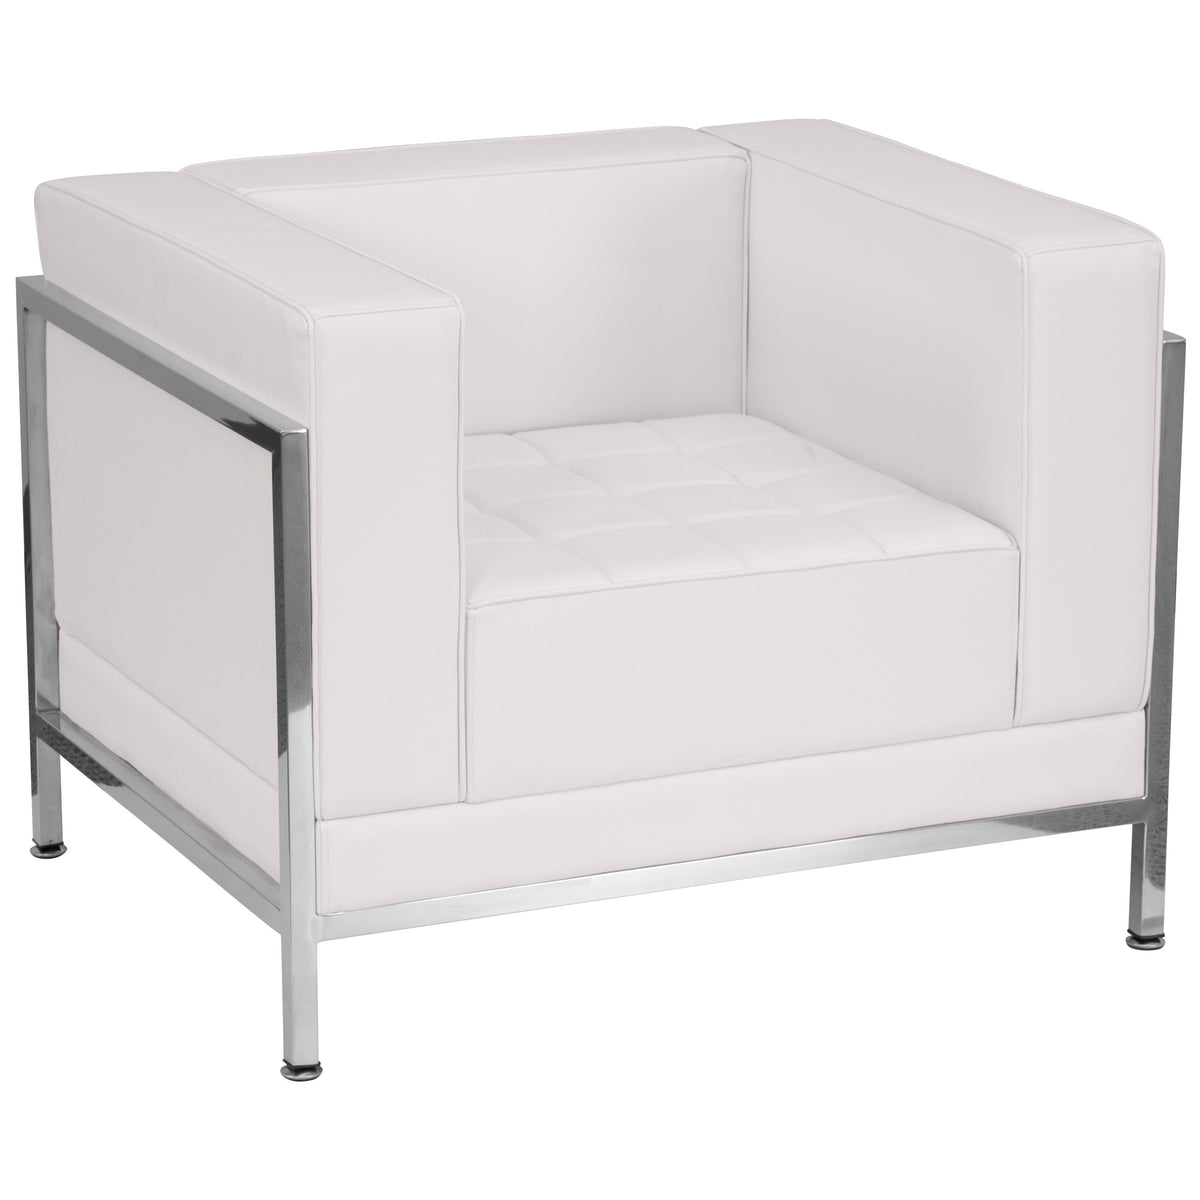 Melrose White |#| White LeatherSoft Modular Chair with Quilted Tufted Seat and Encasing Frame